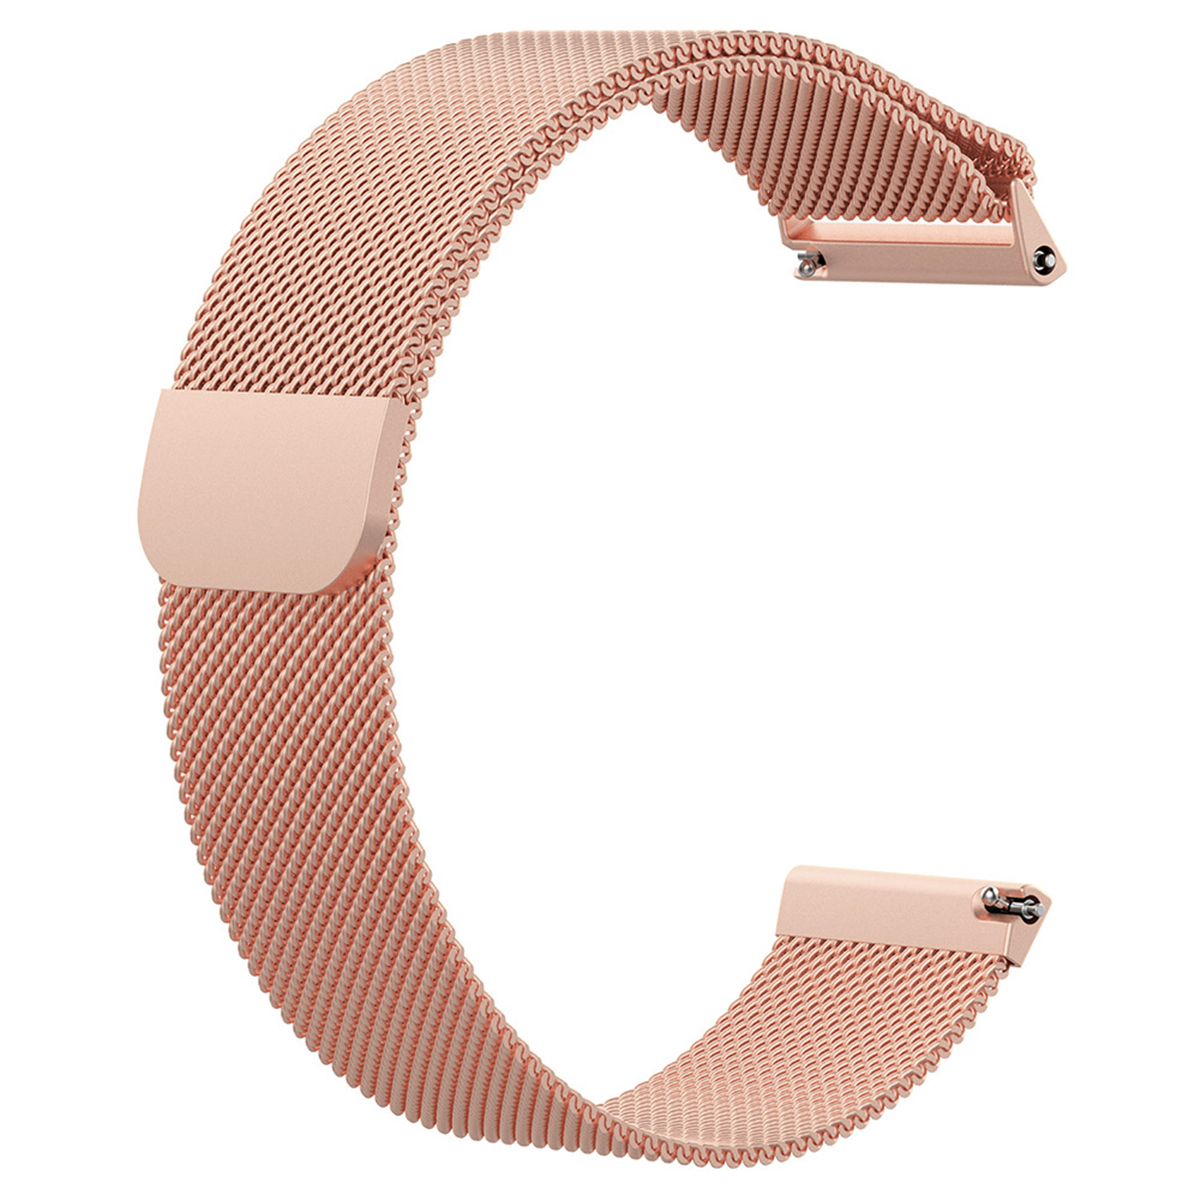 Bakeey-20mm-Replacement-Stainless-Steel-Wrist-Watch-Band-Strap-for-Fitbit-Versa-1331743-3